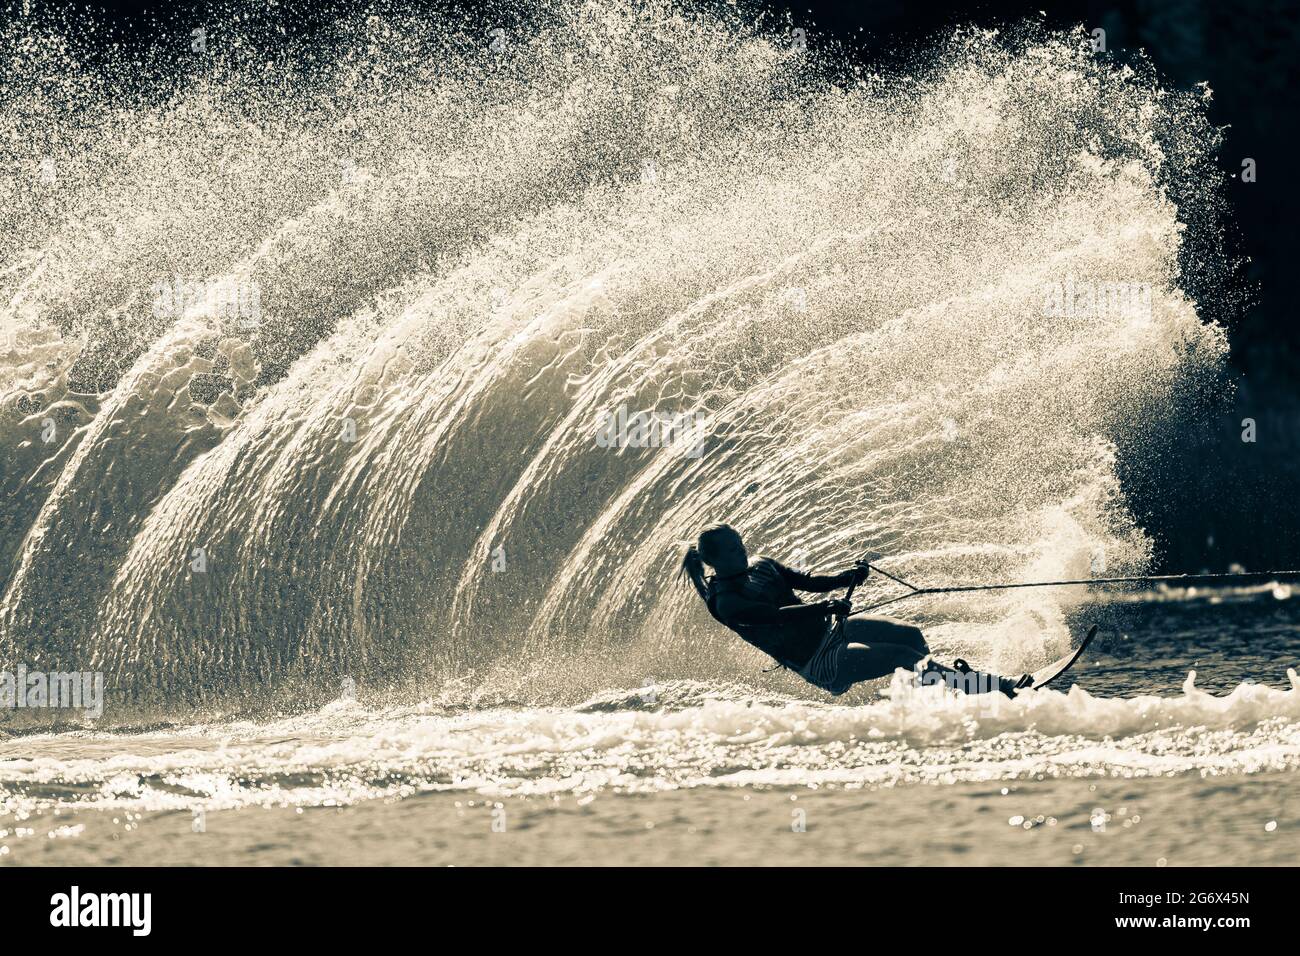 Water ski girl unrecognizable athlete skiing slalom carves a vertical water wake spray  in vintage sepia black white tone for a dramatic contrasts. Stock Photo